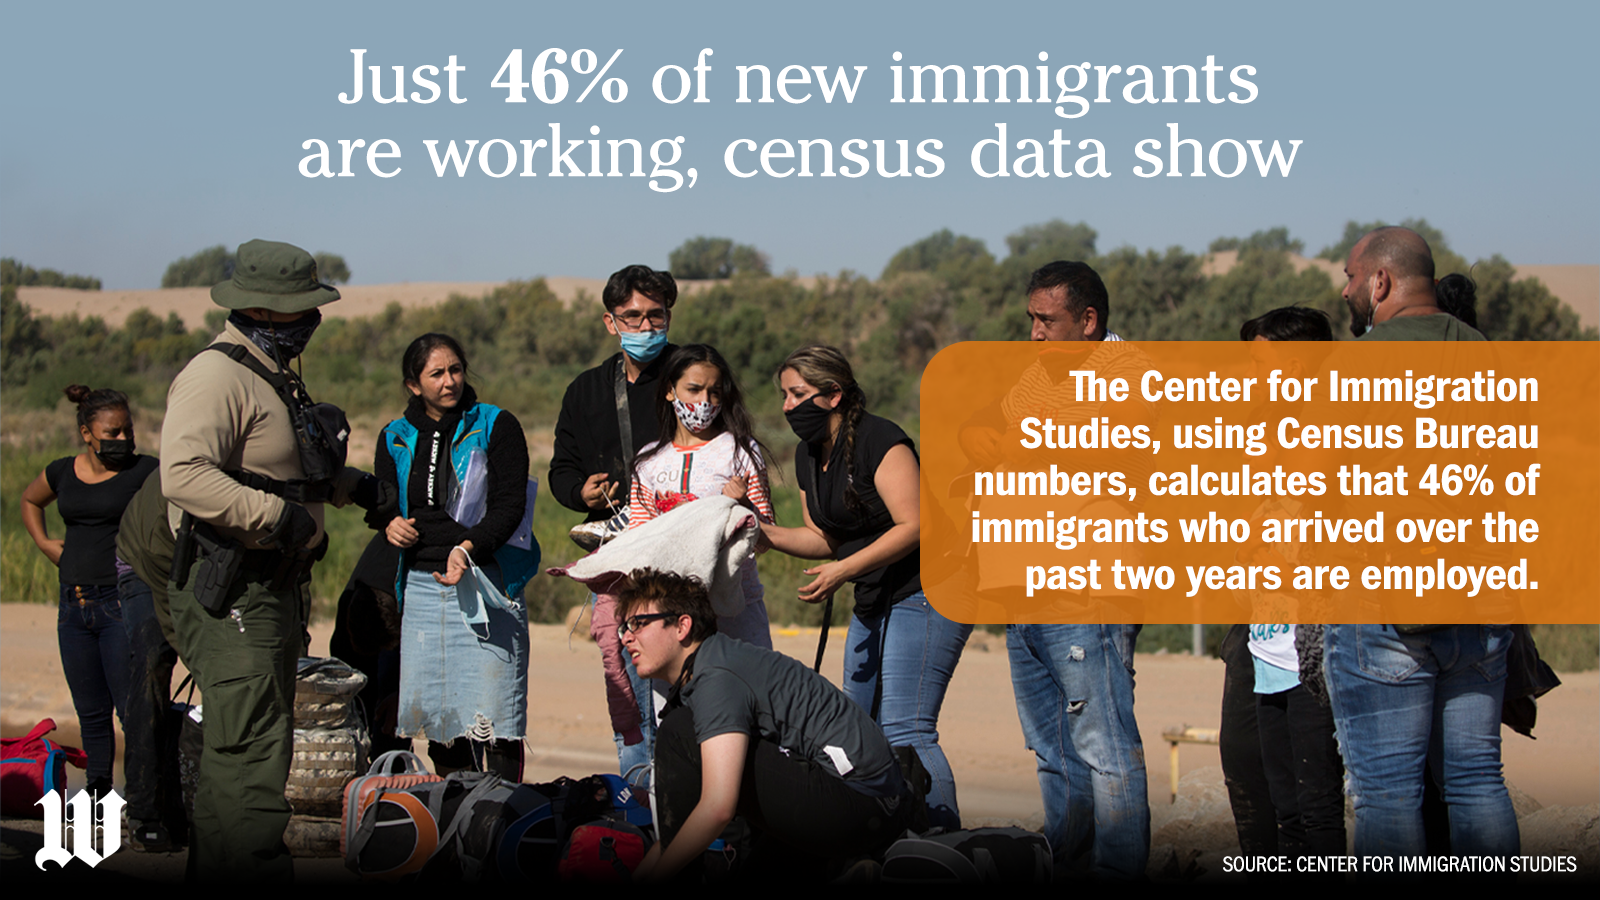 Center for Immigration Studies: Just 46% of new immigrants are working